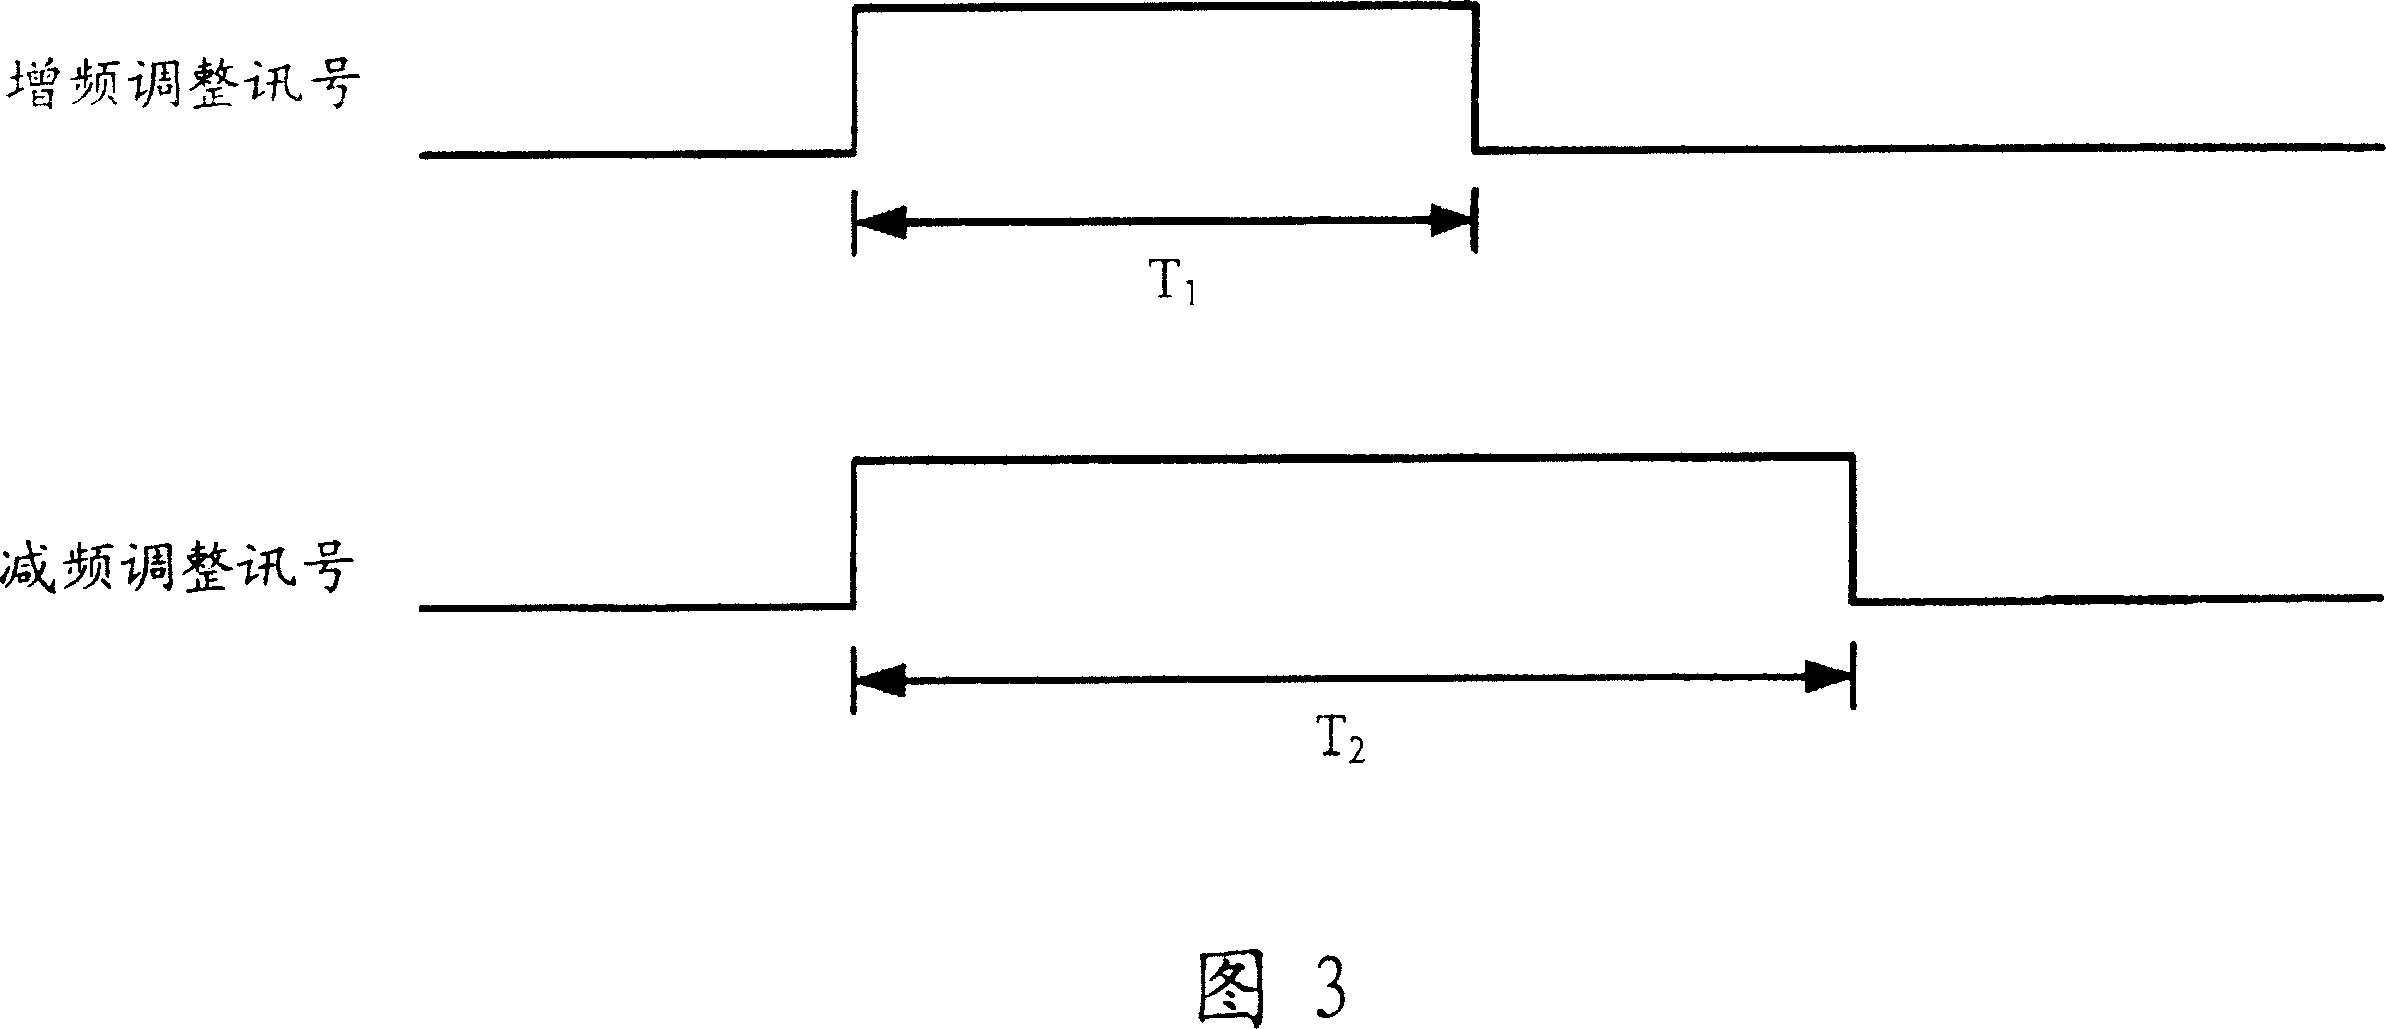 Dynamic regulating circuit and method of basic time pulse signal for front and bus bar